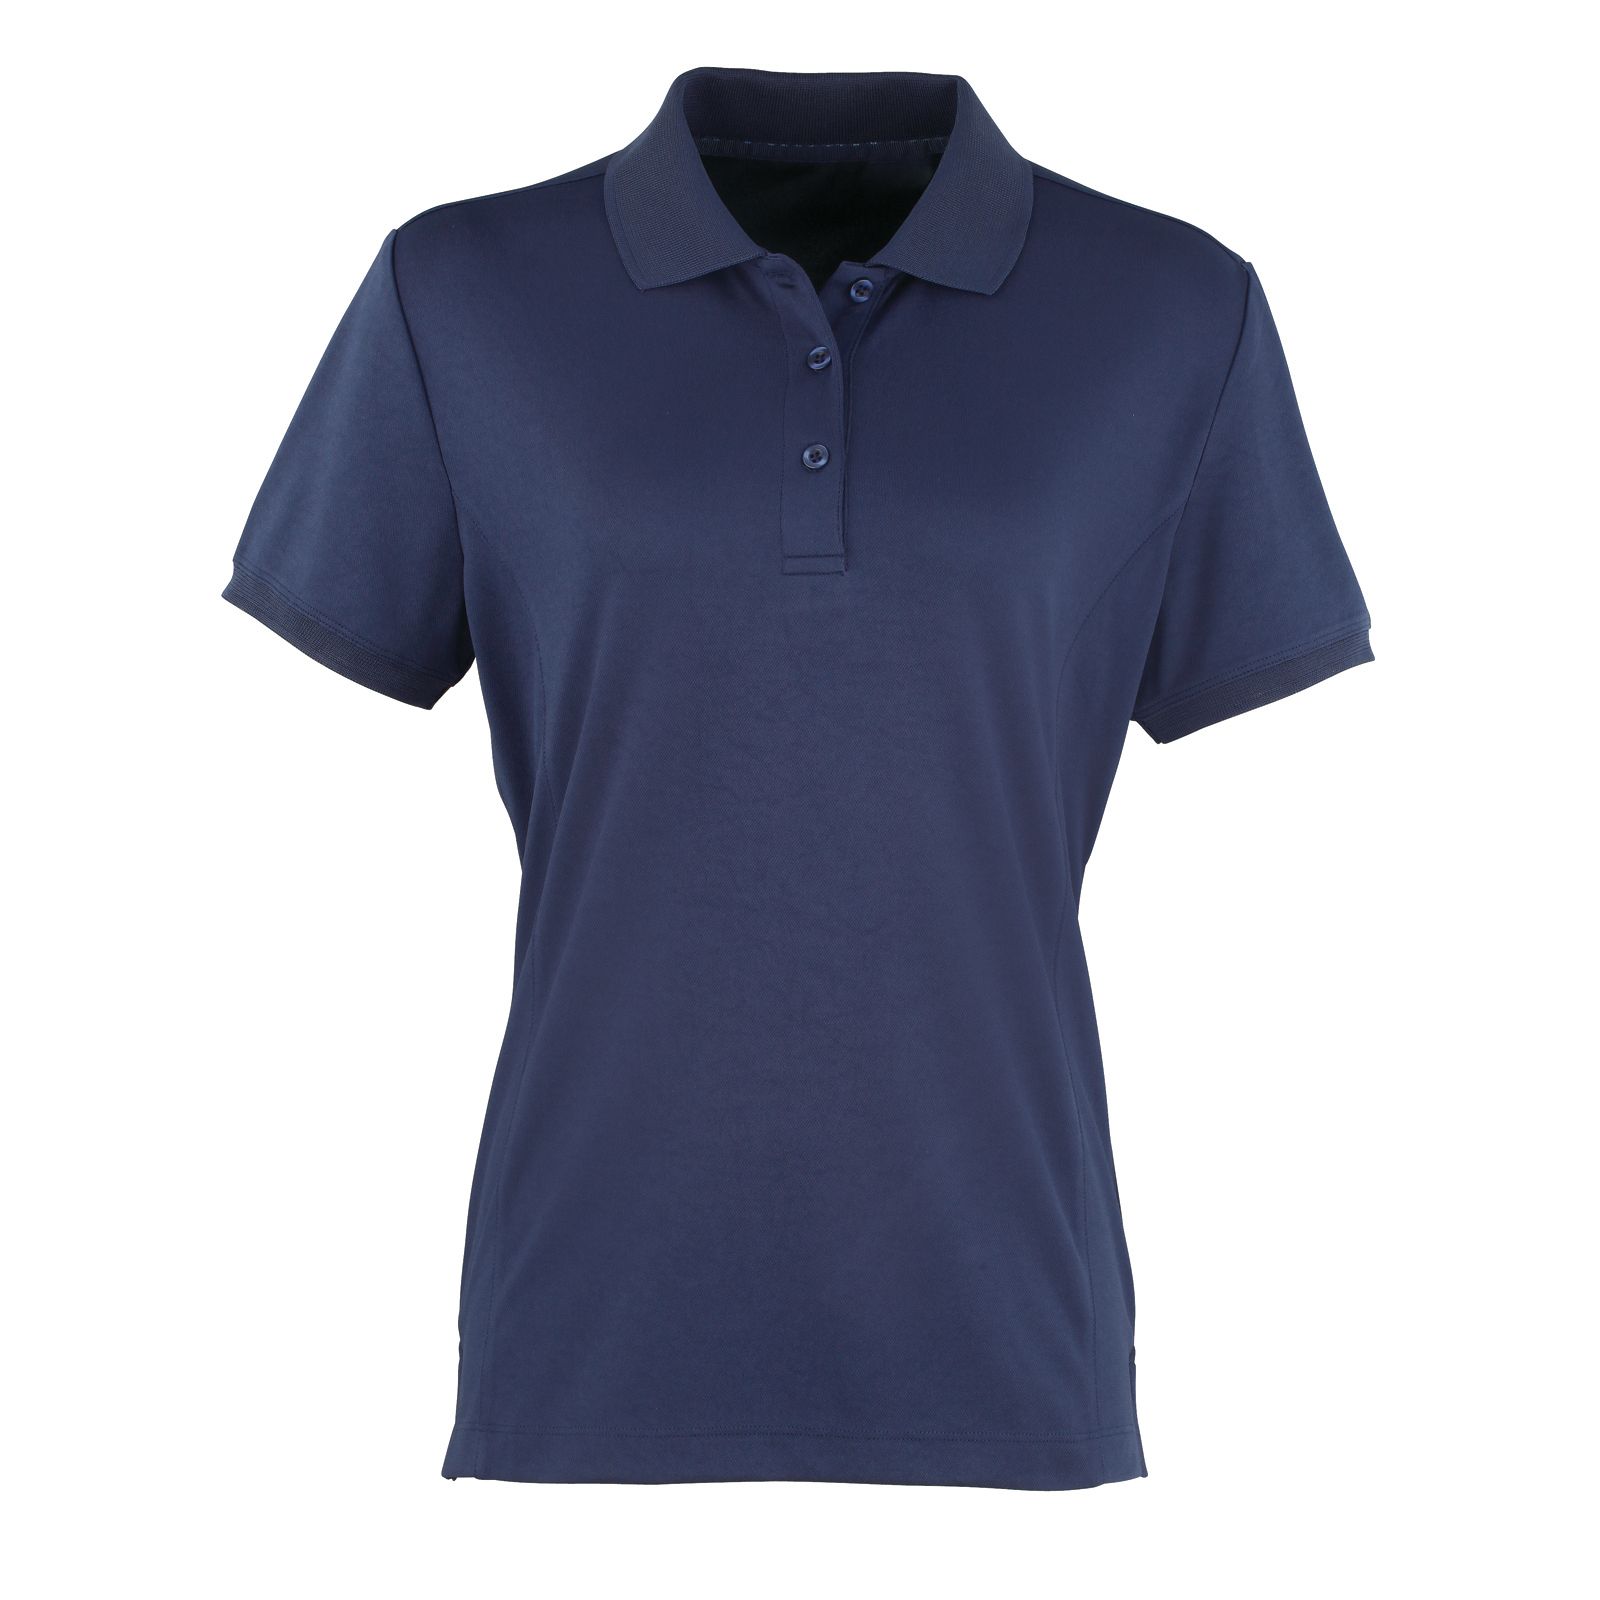 ax-httpswebsystems.s3.amazonaws.comtmp_for_downloadpremier-ladies-coolchecker-pique-polo-navy.jpg